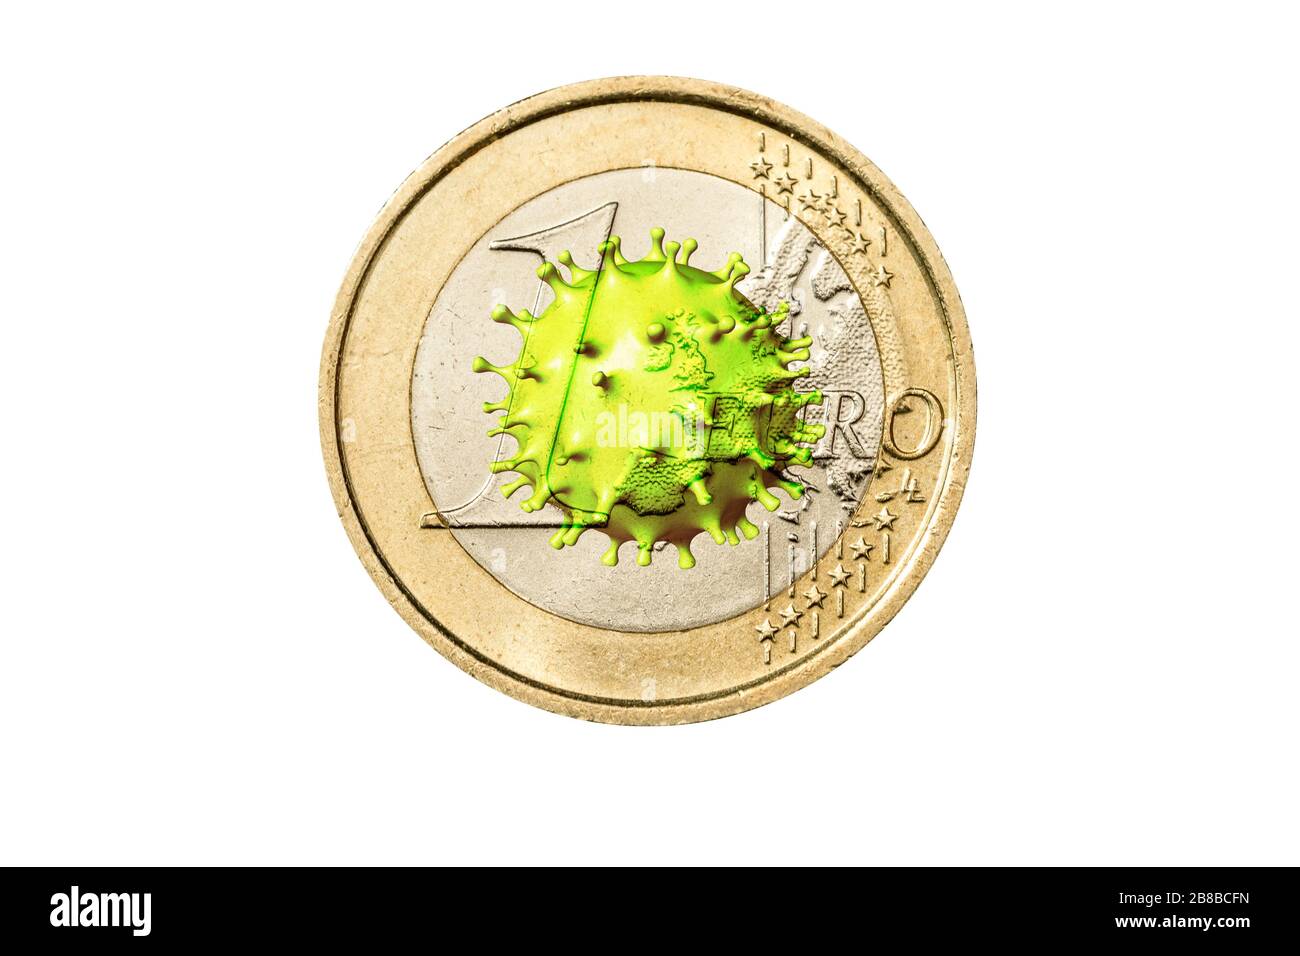 Pandemic and viral epidemic brings down European currency and stock exchange in Europe. Covid-19 outbreak or Coronavirus, 2019-nCoV, virus-cell above Stock Photo